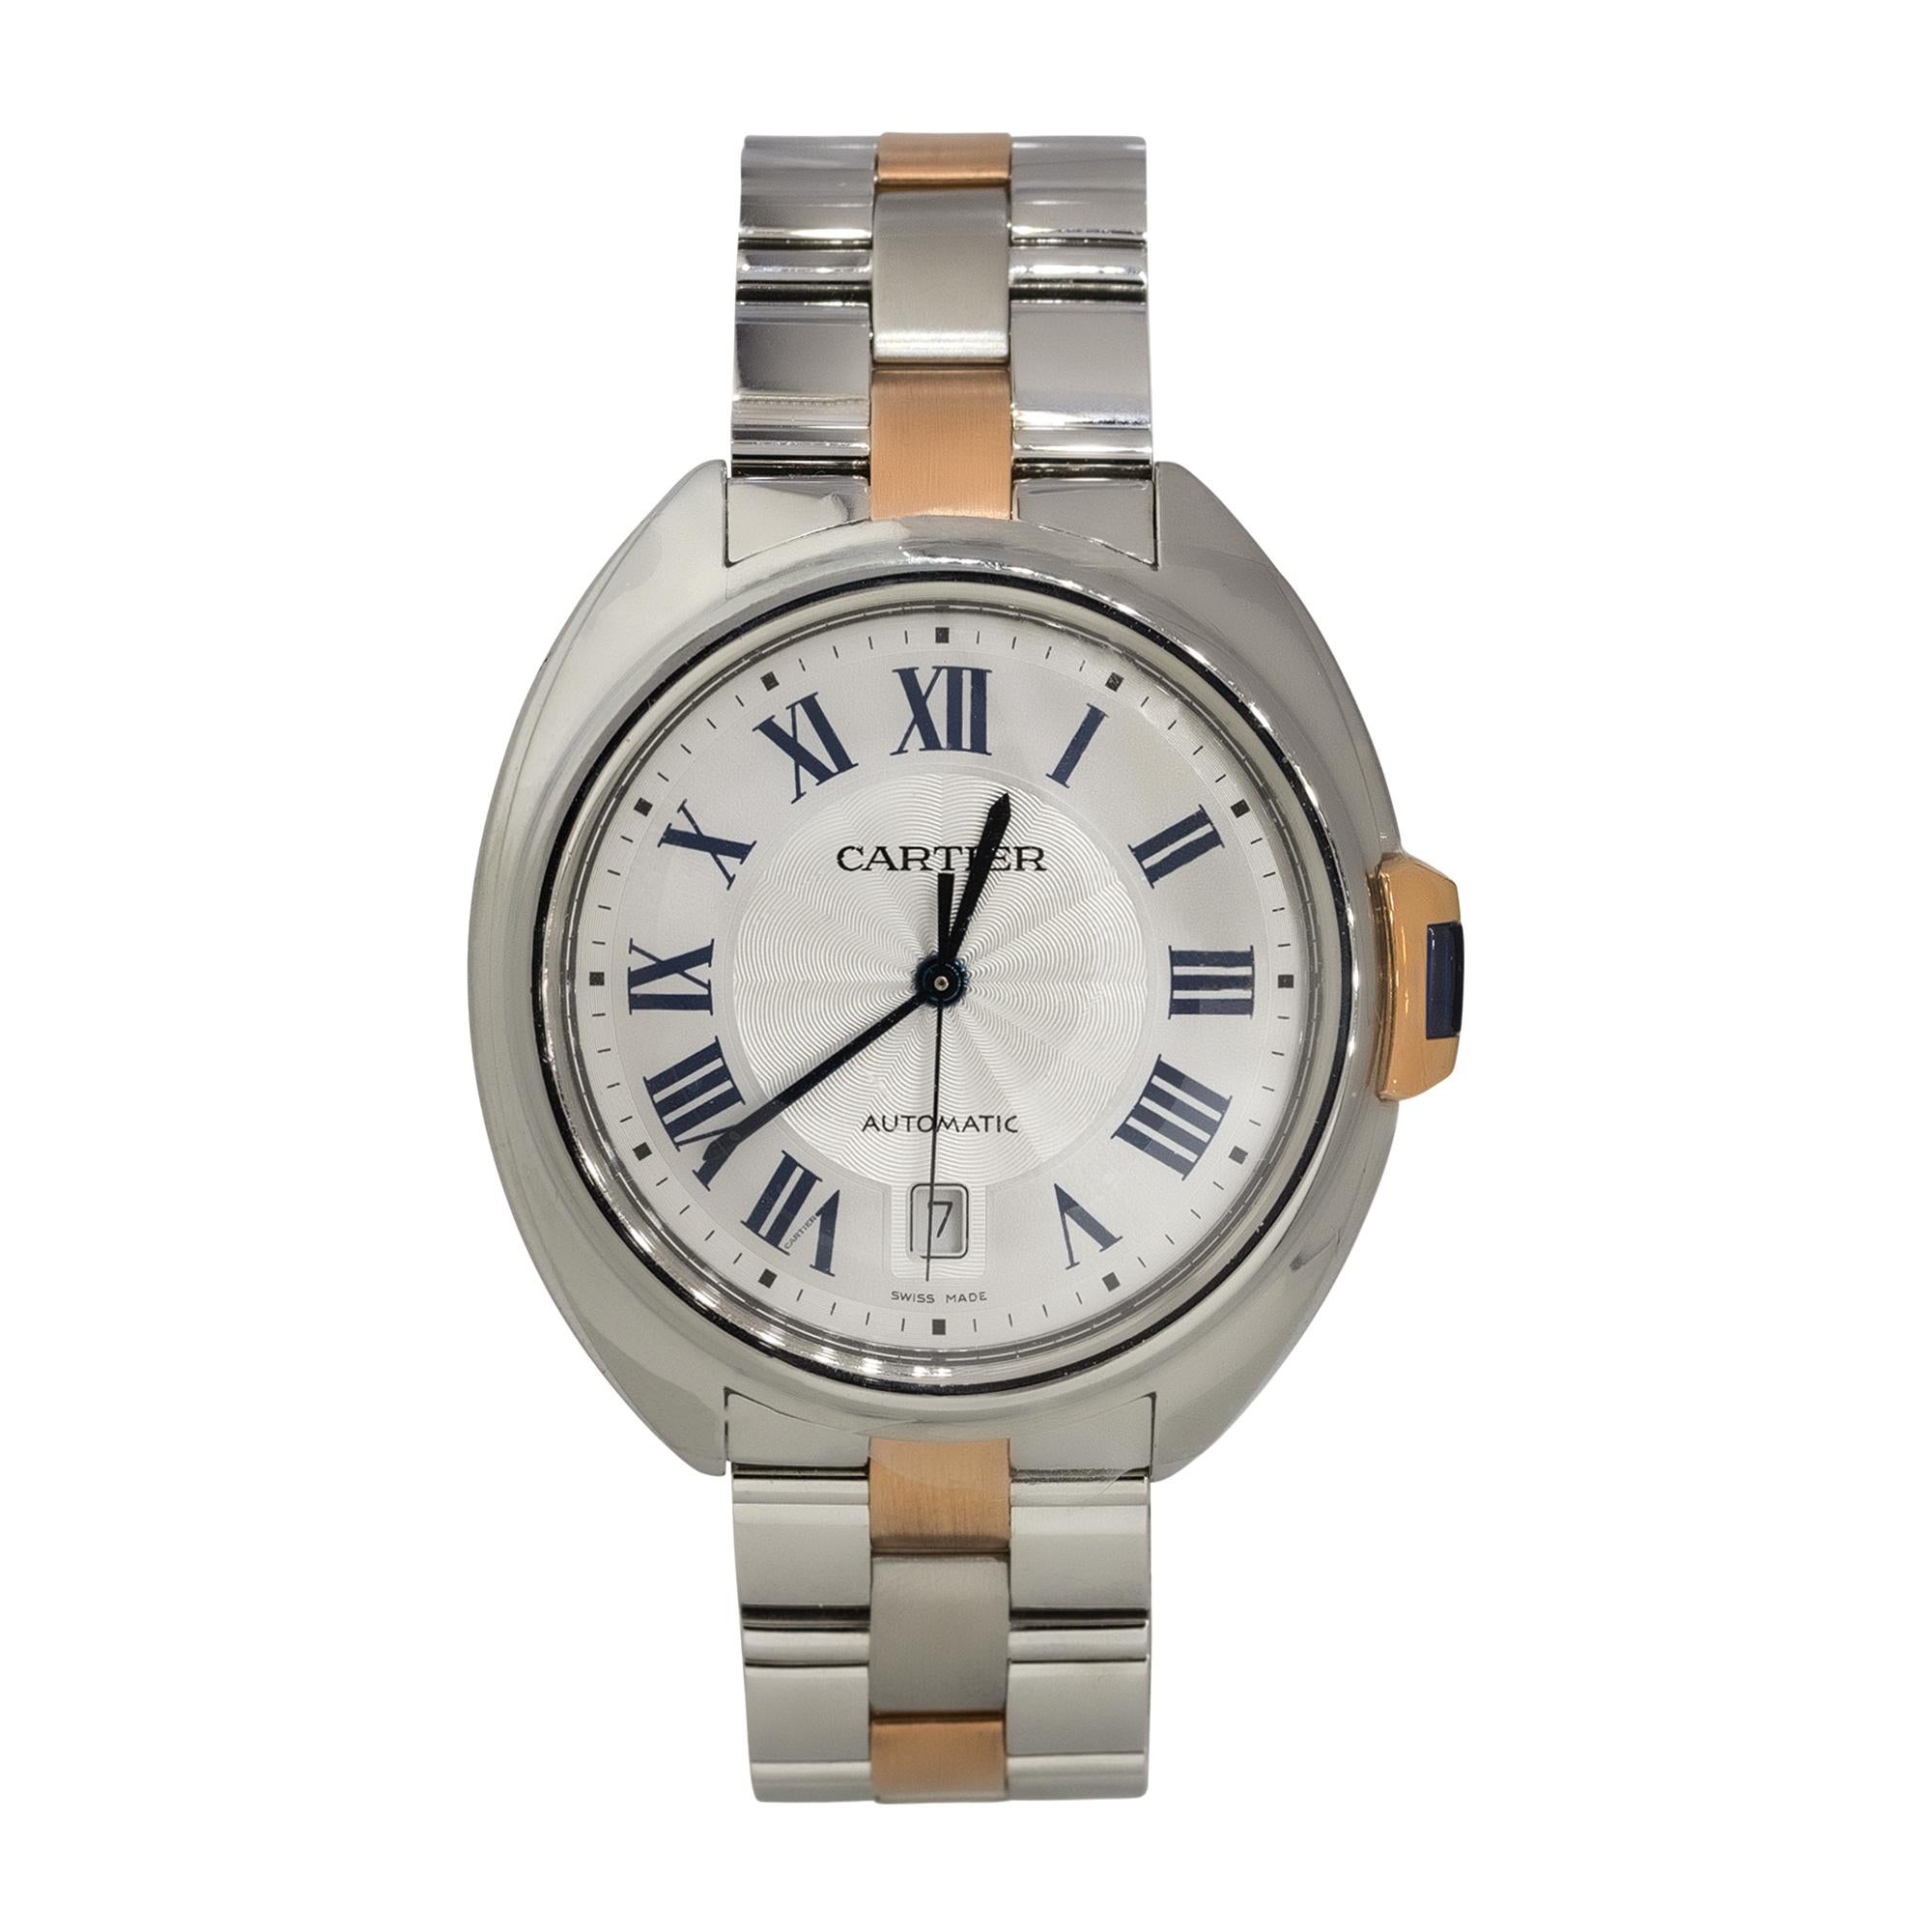 Brand: Cartier
Model: Clé de Cartier
Reference Number: 3850
Case Material: Stainless Steel & 18k Rose Gold
Dial: Silver dial with blue hands and black roman numerals. Date can be found at 6 o'clock
Bezel: 18k Rose gold smooth bezel
Case